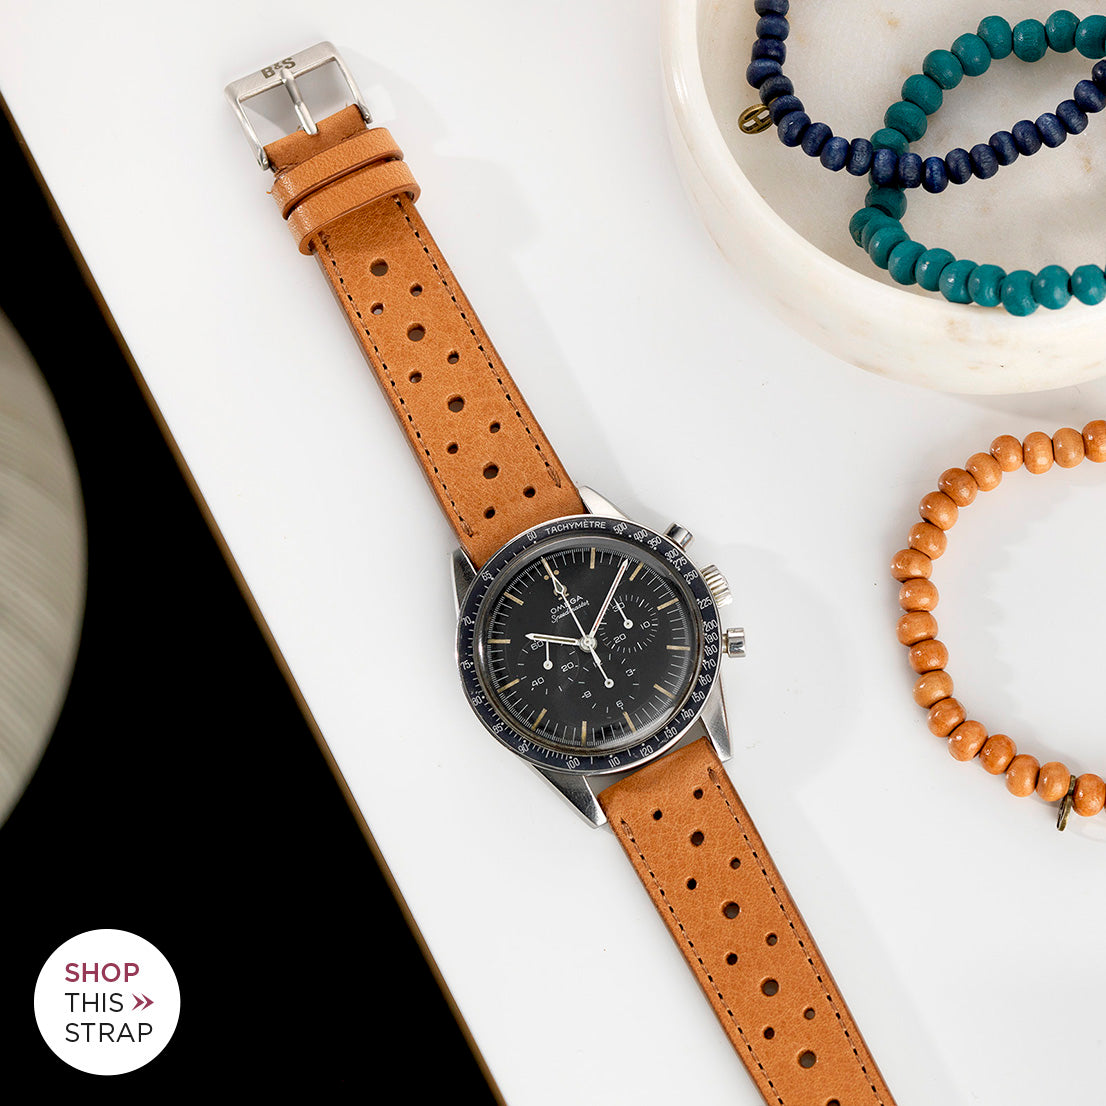 Bulang and Sons_Strap Guide_The Omega Straight Lugs speedmaster_Racing Caramel Brown Leather Watch Strap